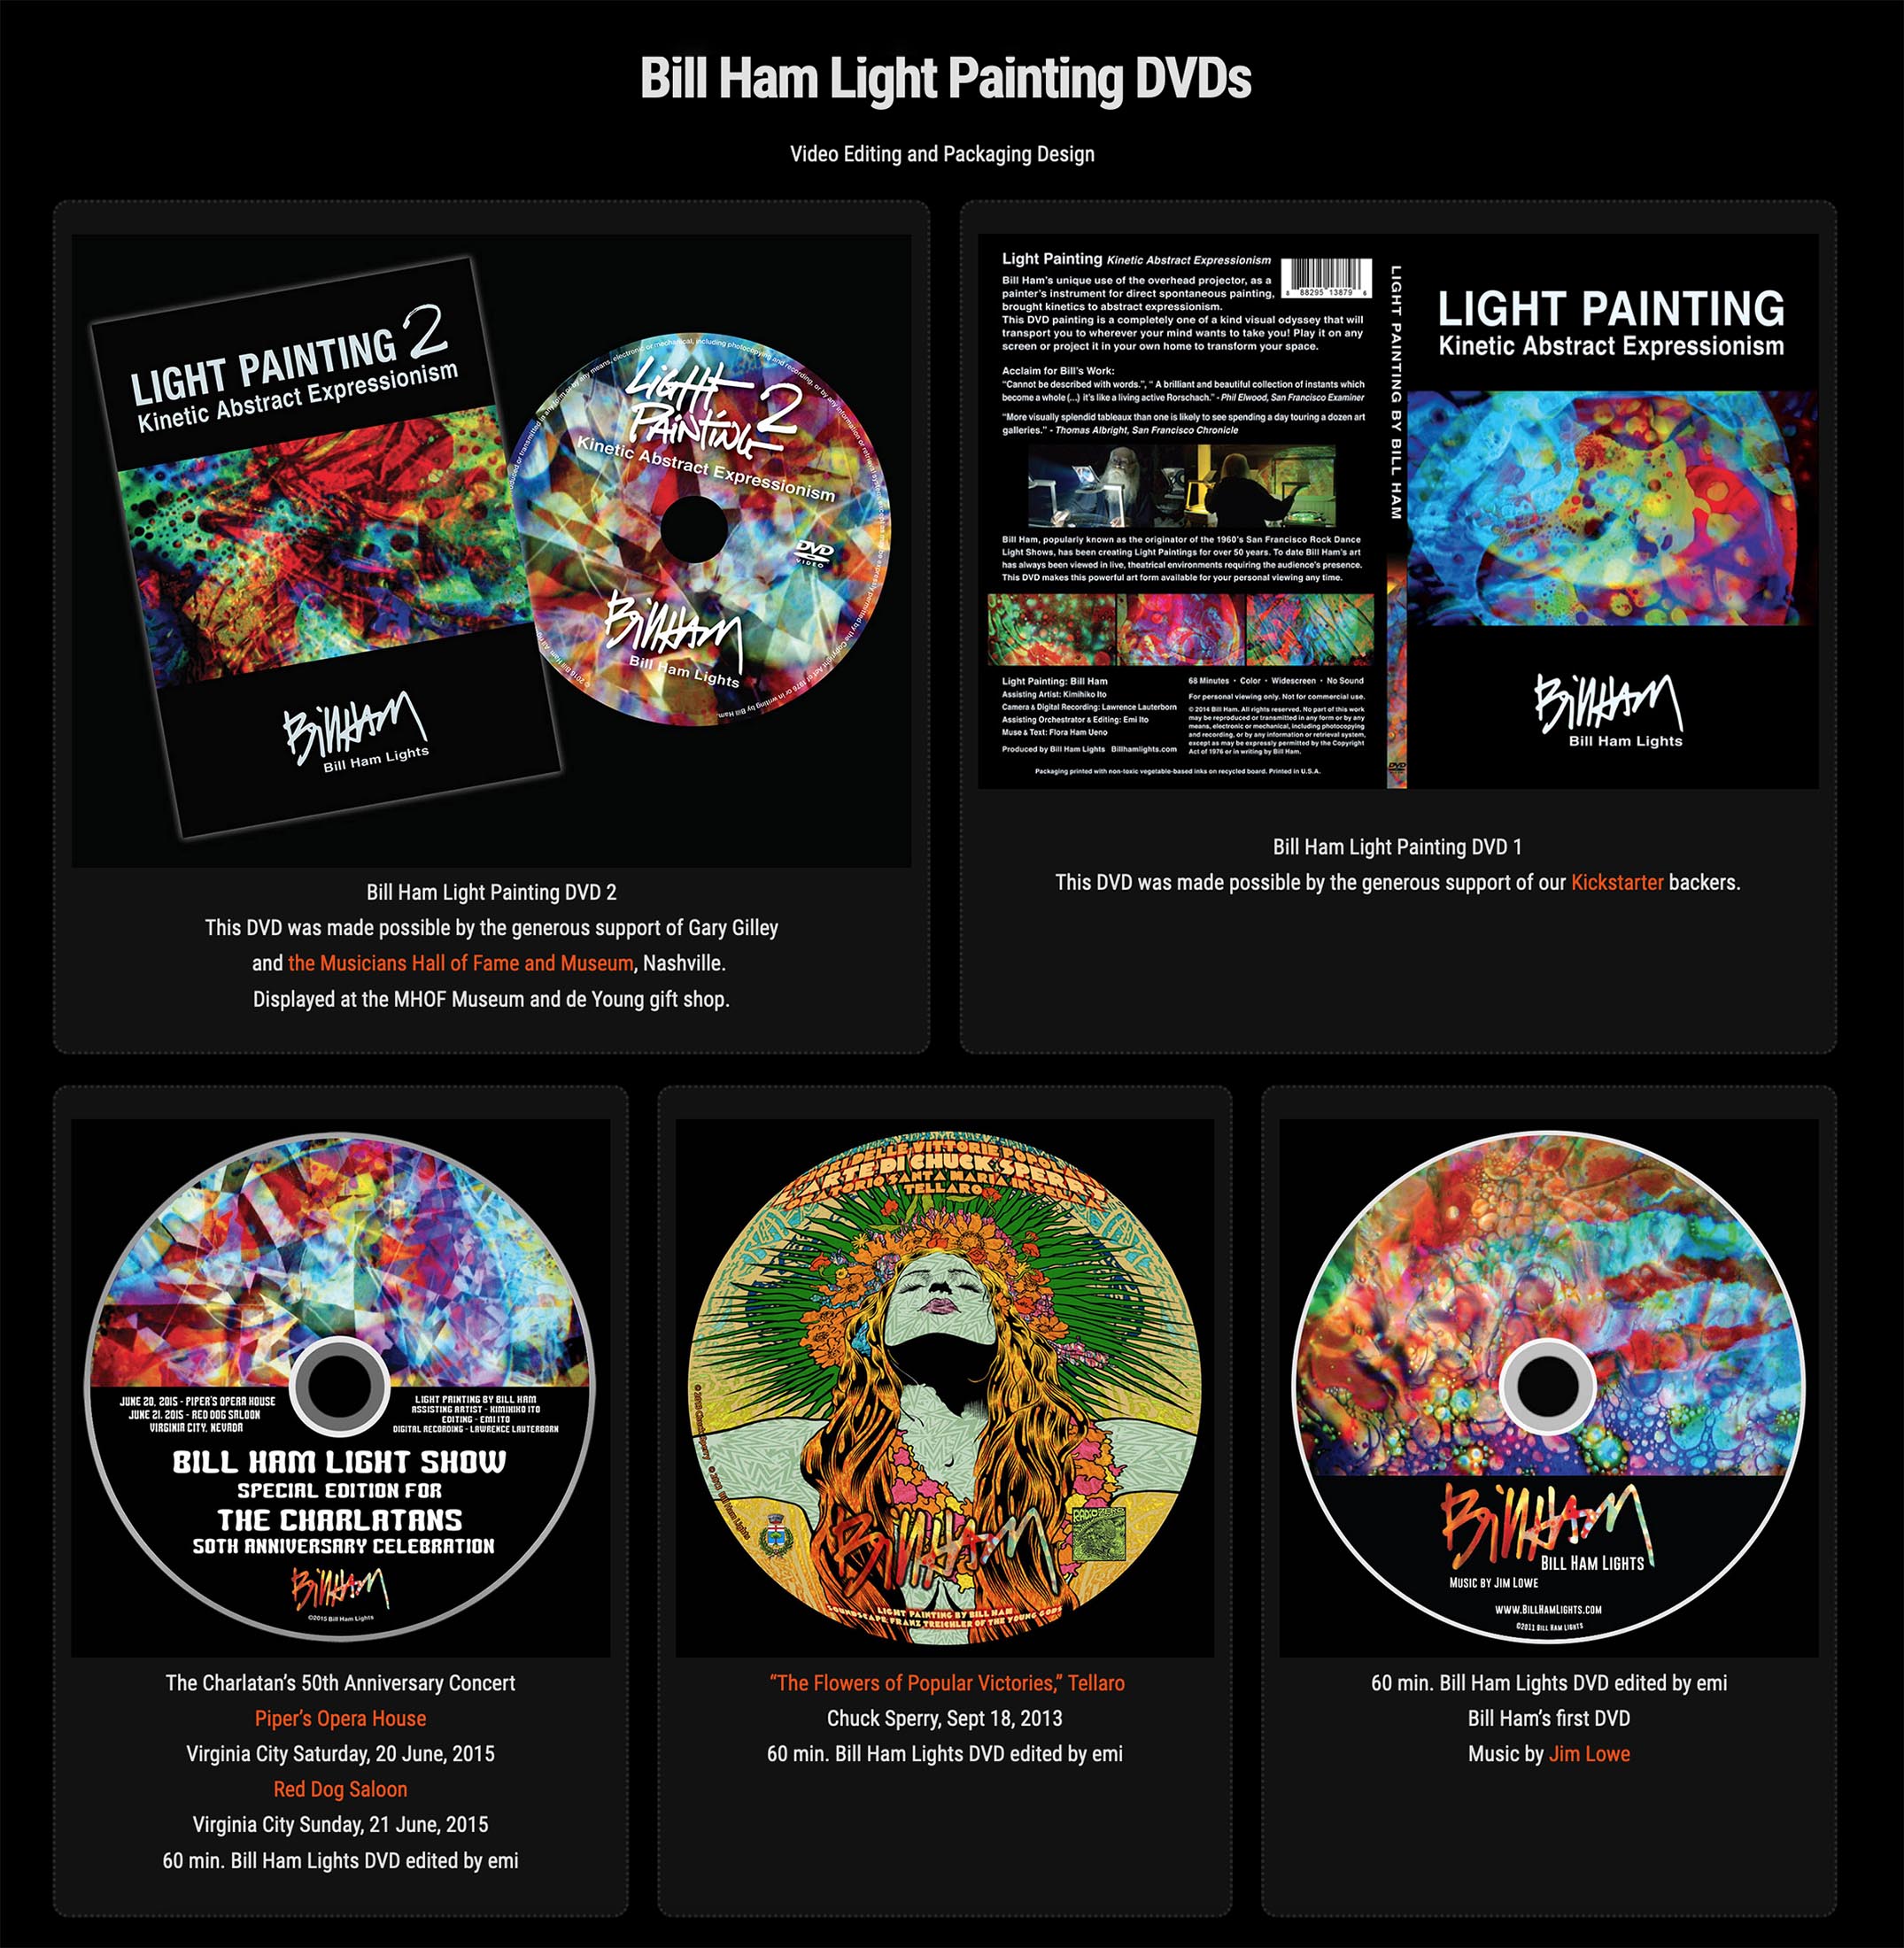 Bill Ham Light Painting DVDs, video editing, package design, webstore by emi